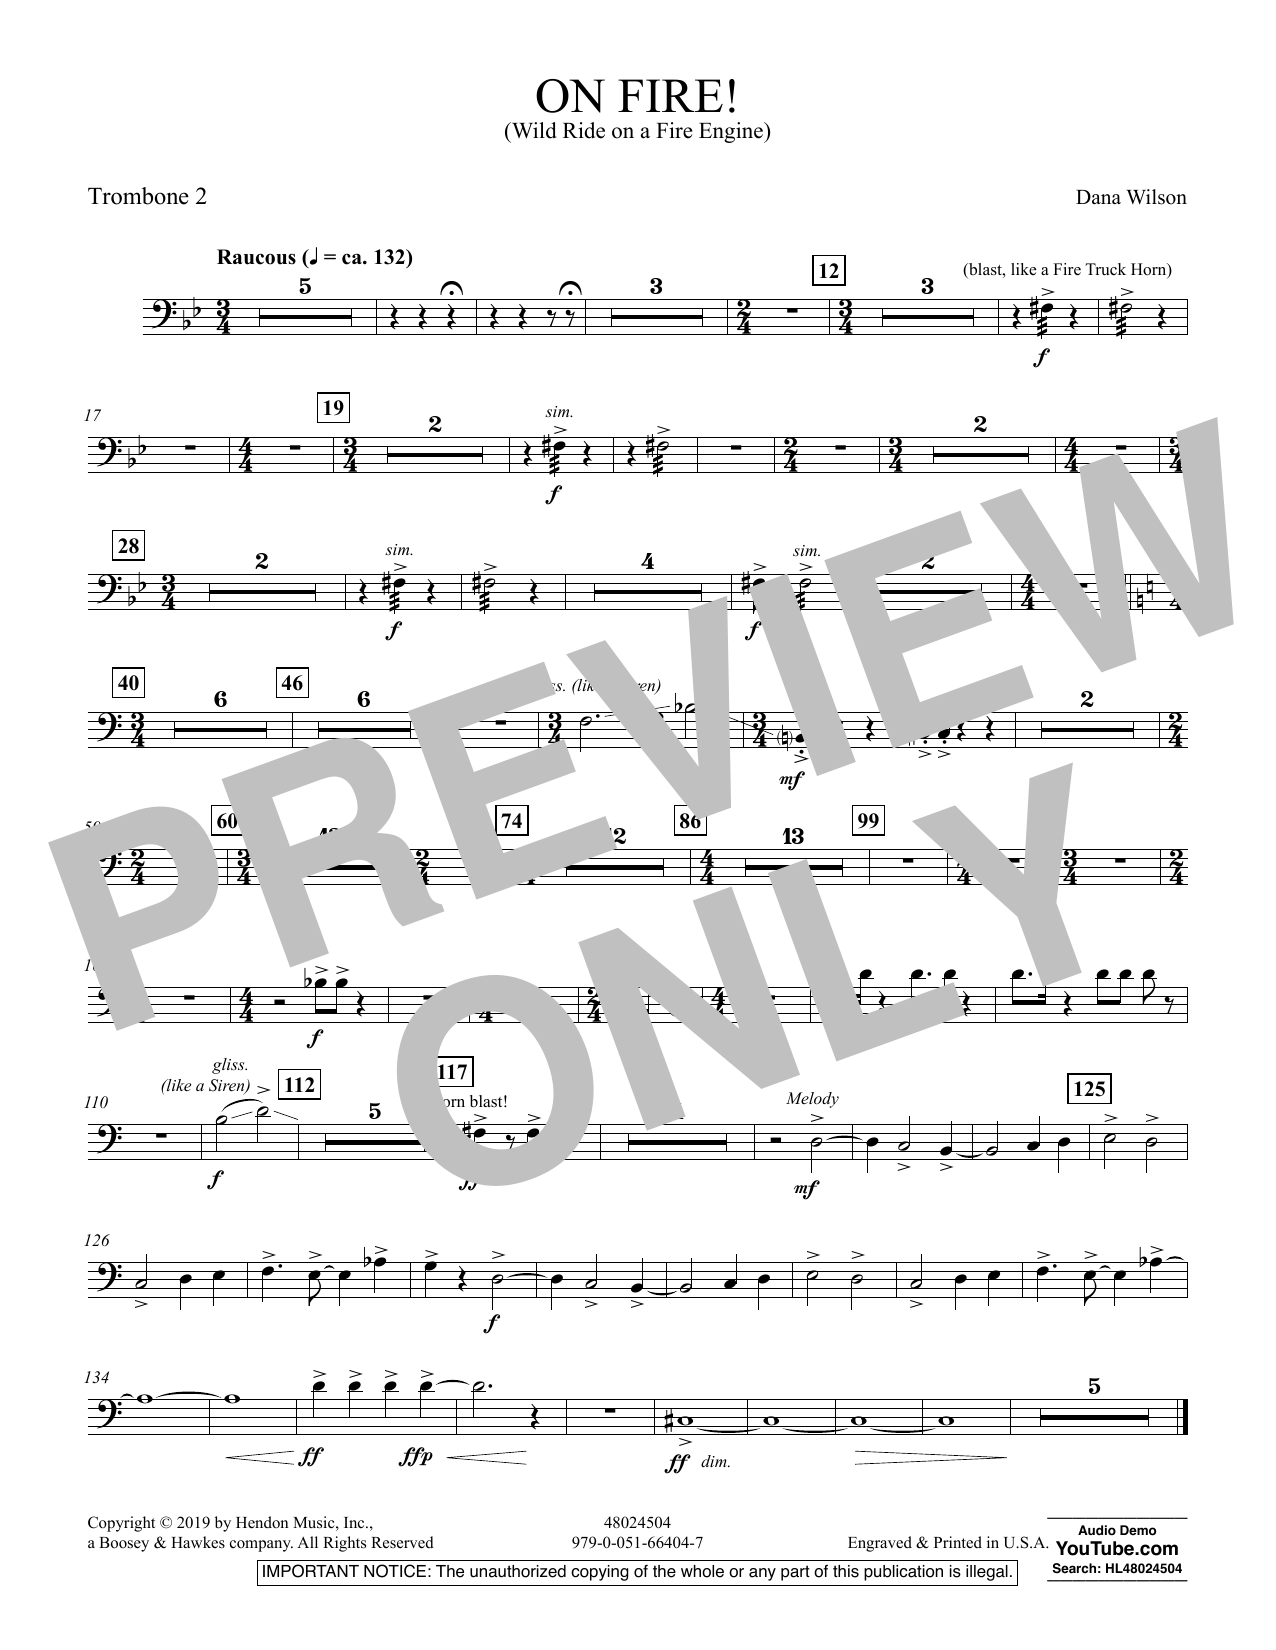 Dana Wilson On Fire! (Wild Ride on a Fire Engine) - Trombone 2 sheet music preview music notes and score for Concert Band including 1 page(s)